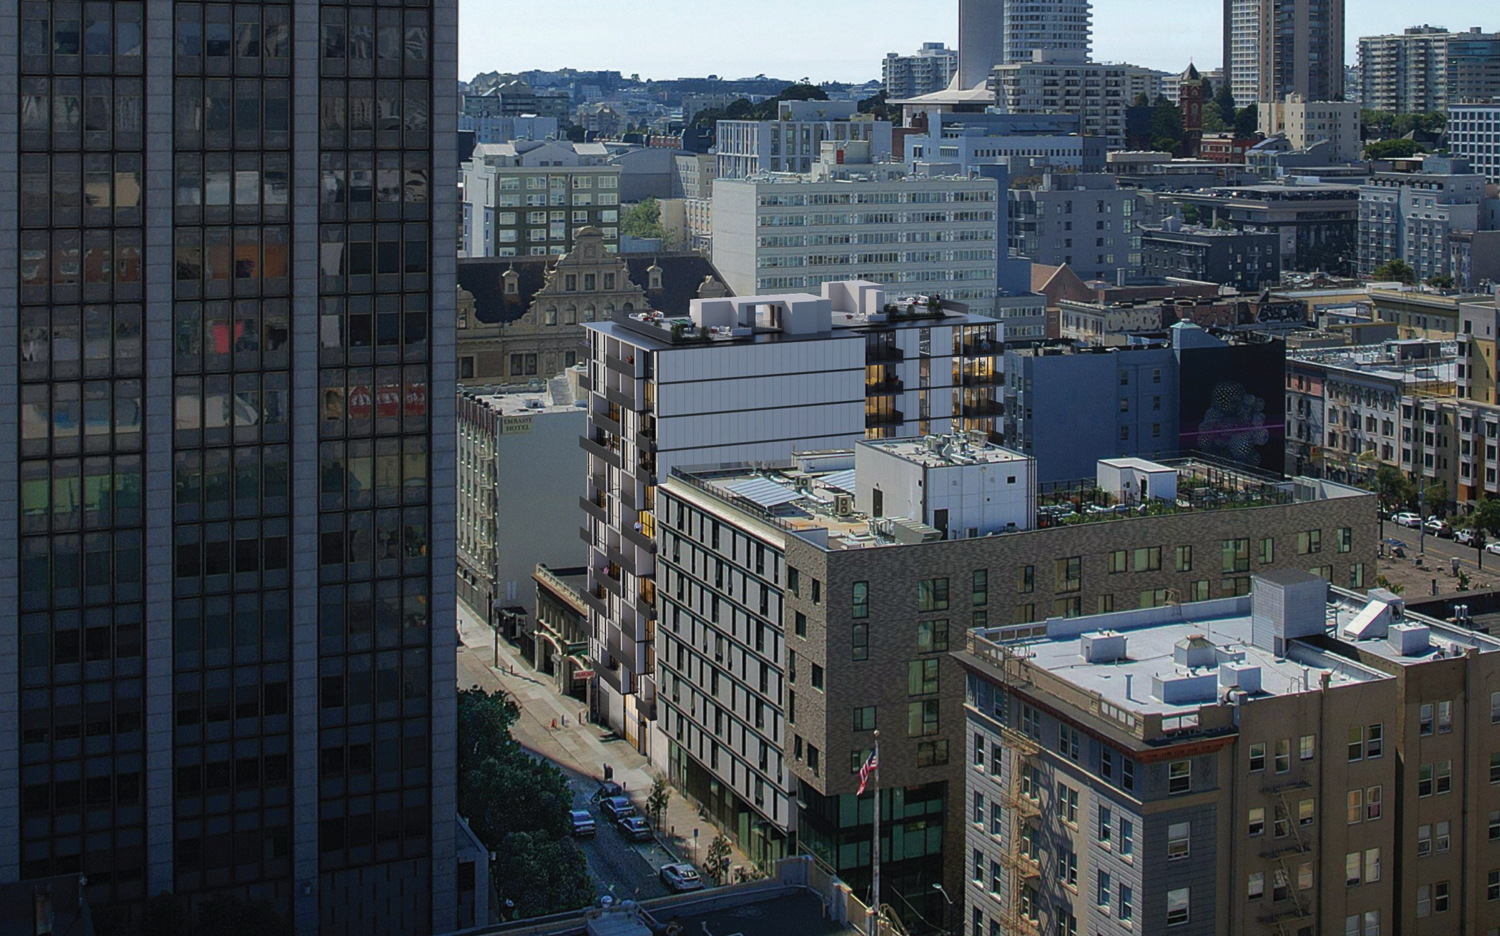 530 Turk Street aerial perspective cropped, rendering by RG Architecture